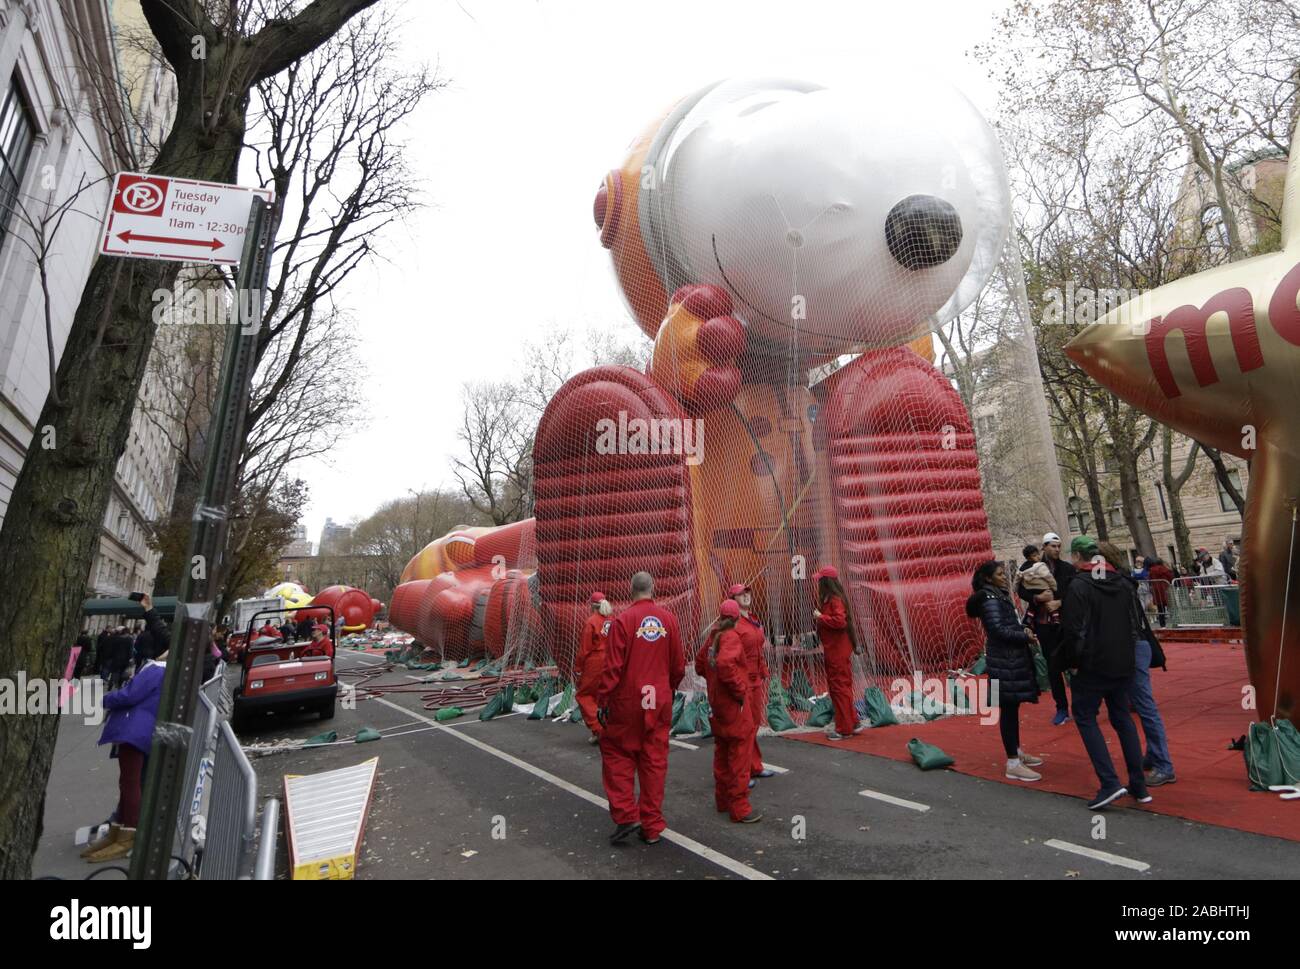 Photo Highlights of 93rd Edition of Macy's Thanksgiving Parade